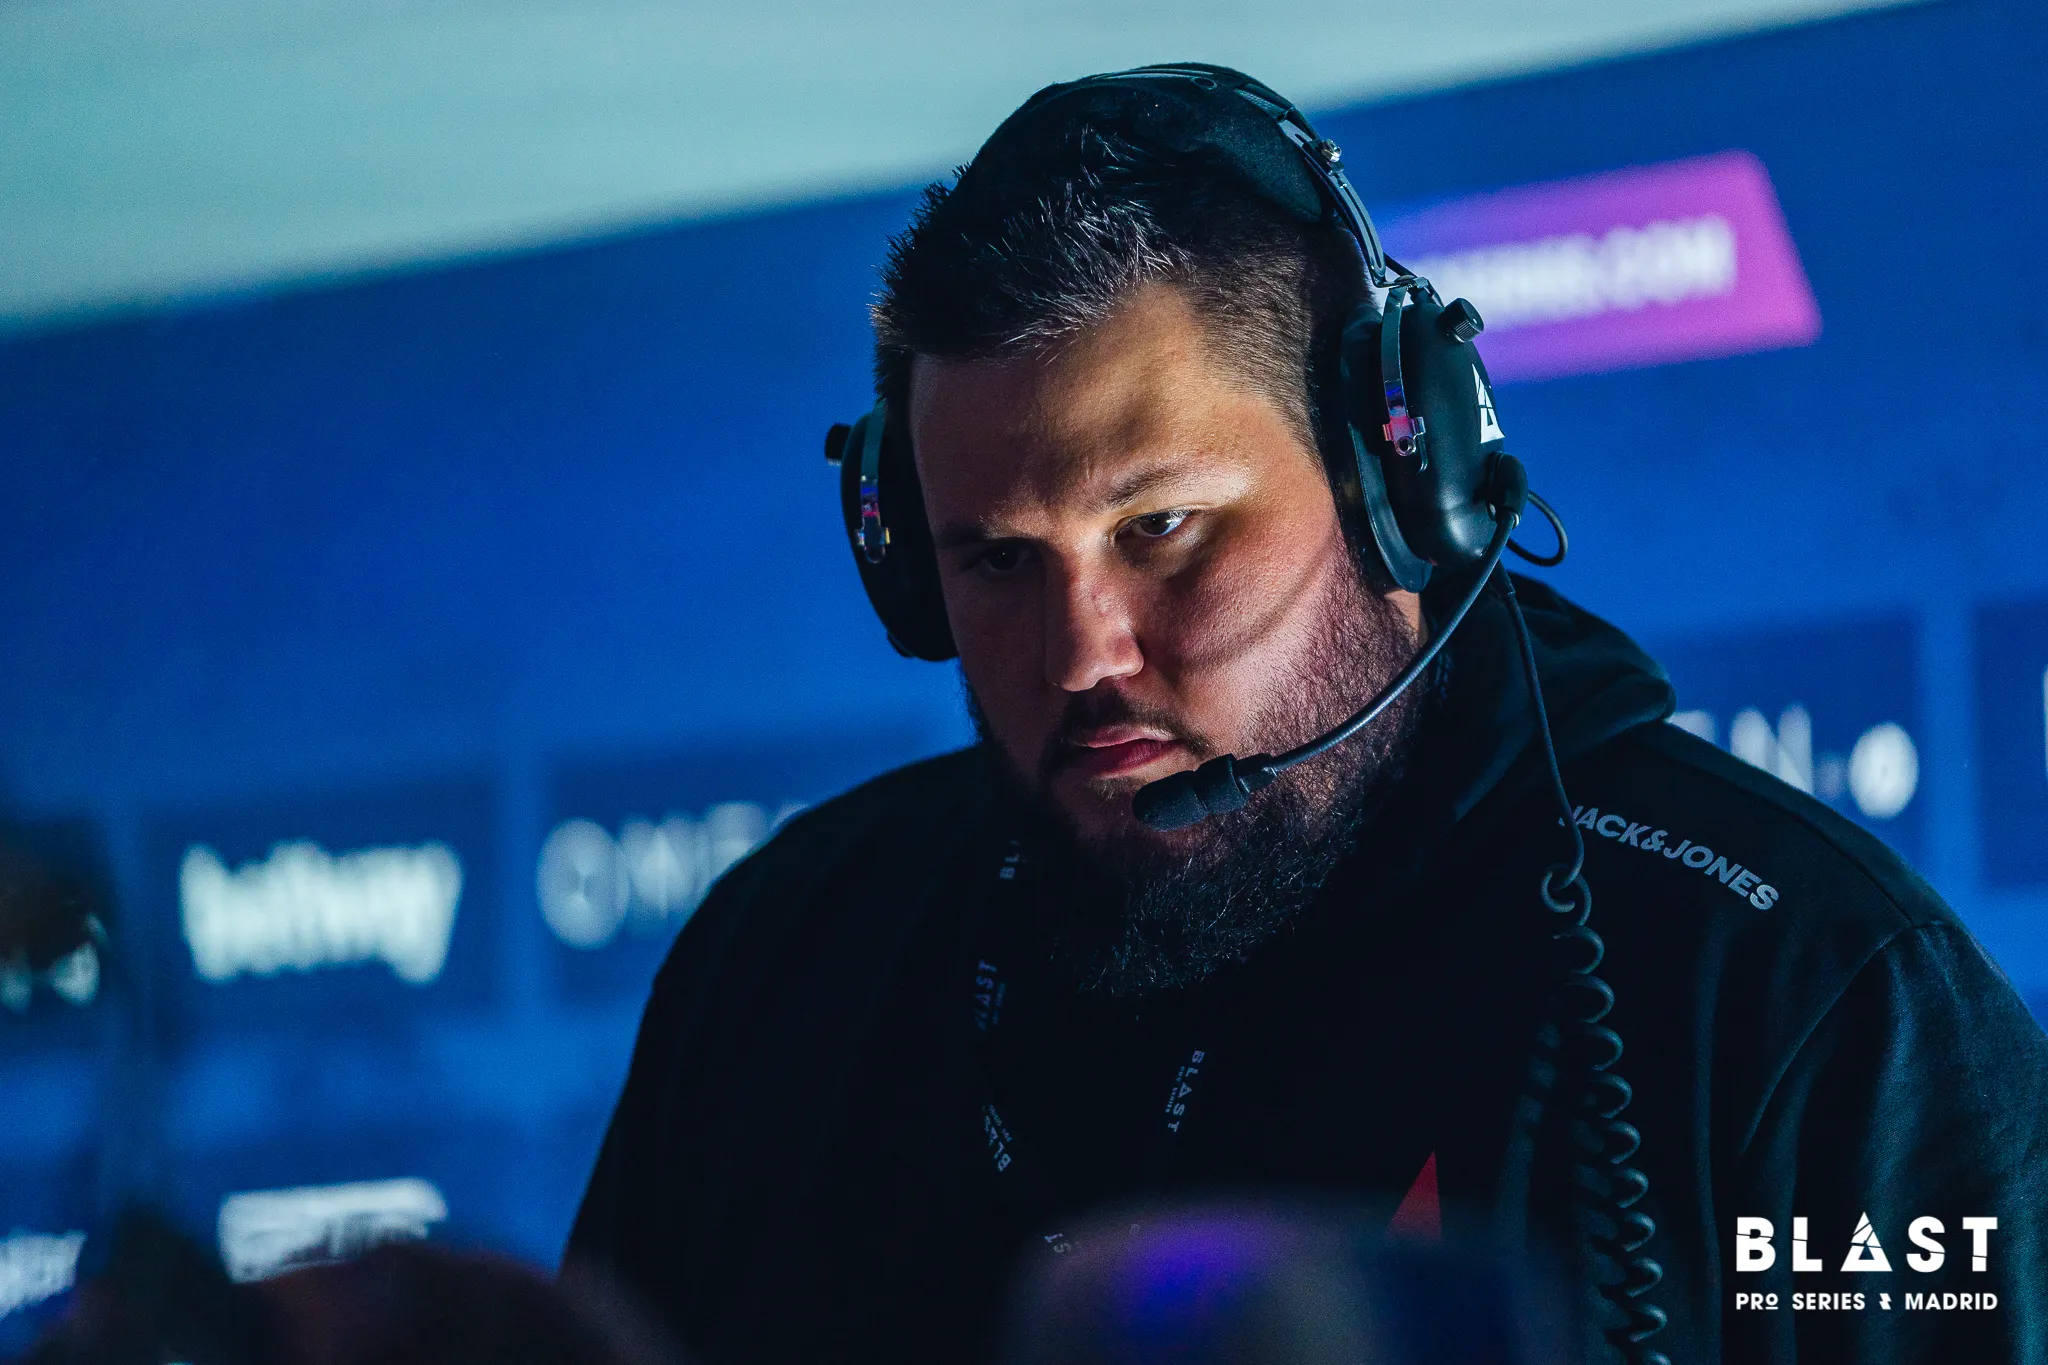 Photo taken of legendary CS:GO coach zonic while Astralis played at BLAST Pro Series.